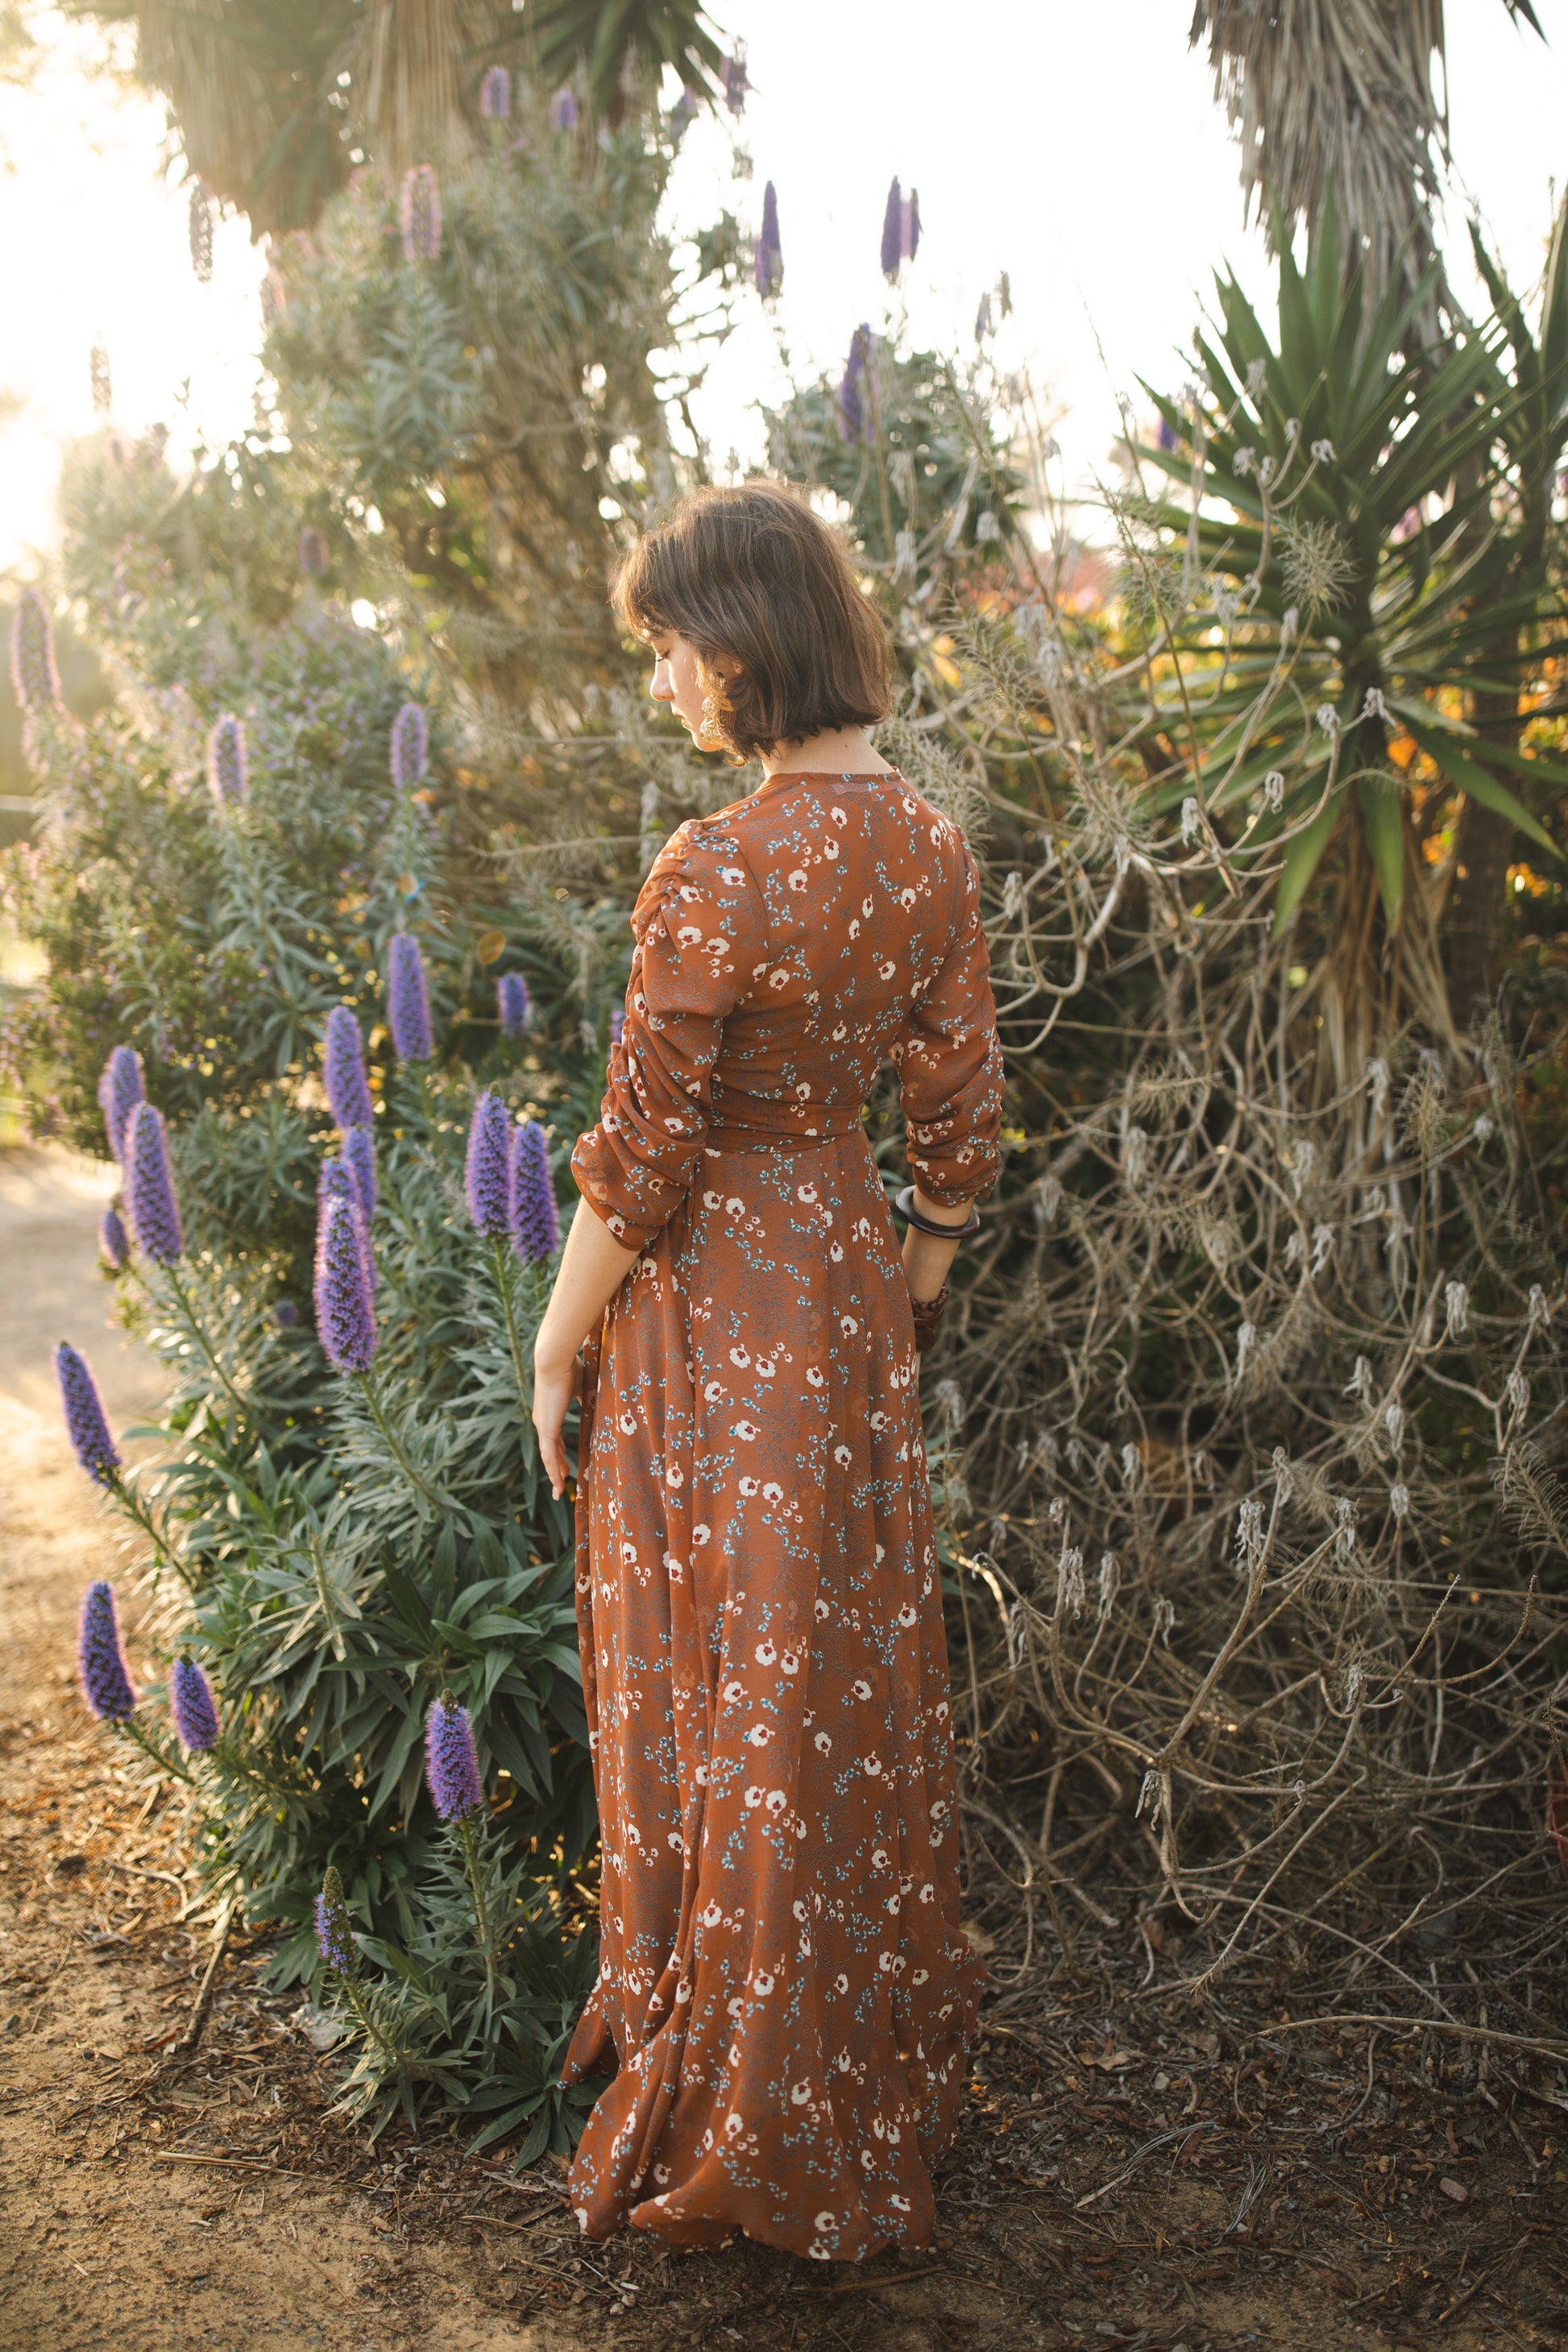 jennafer grace Signature Wrap Dress in Terracotta rustic terracotta orange red maxi dress with pastel floral flower print with long waist tie and ruched sleeves boho bohemian hippie romantic whimsical spring gown wedding guest dress unisex handmade